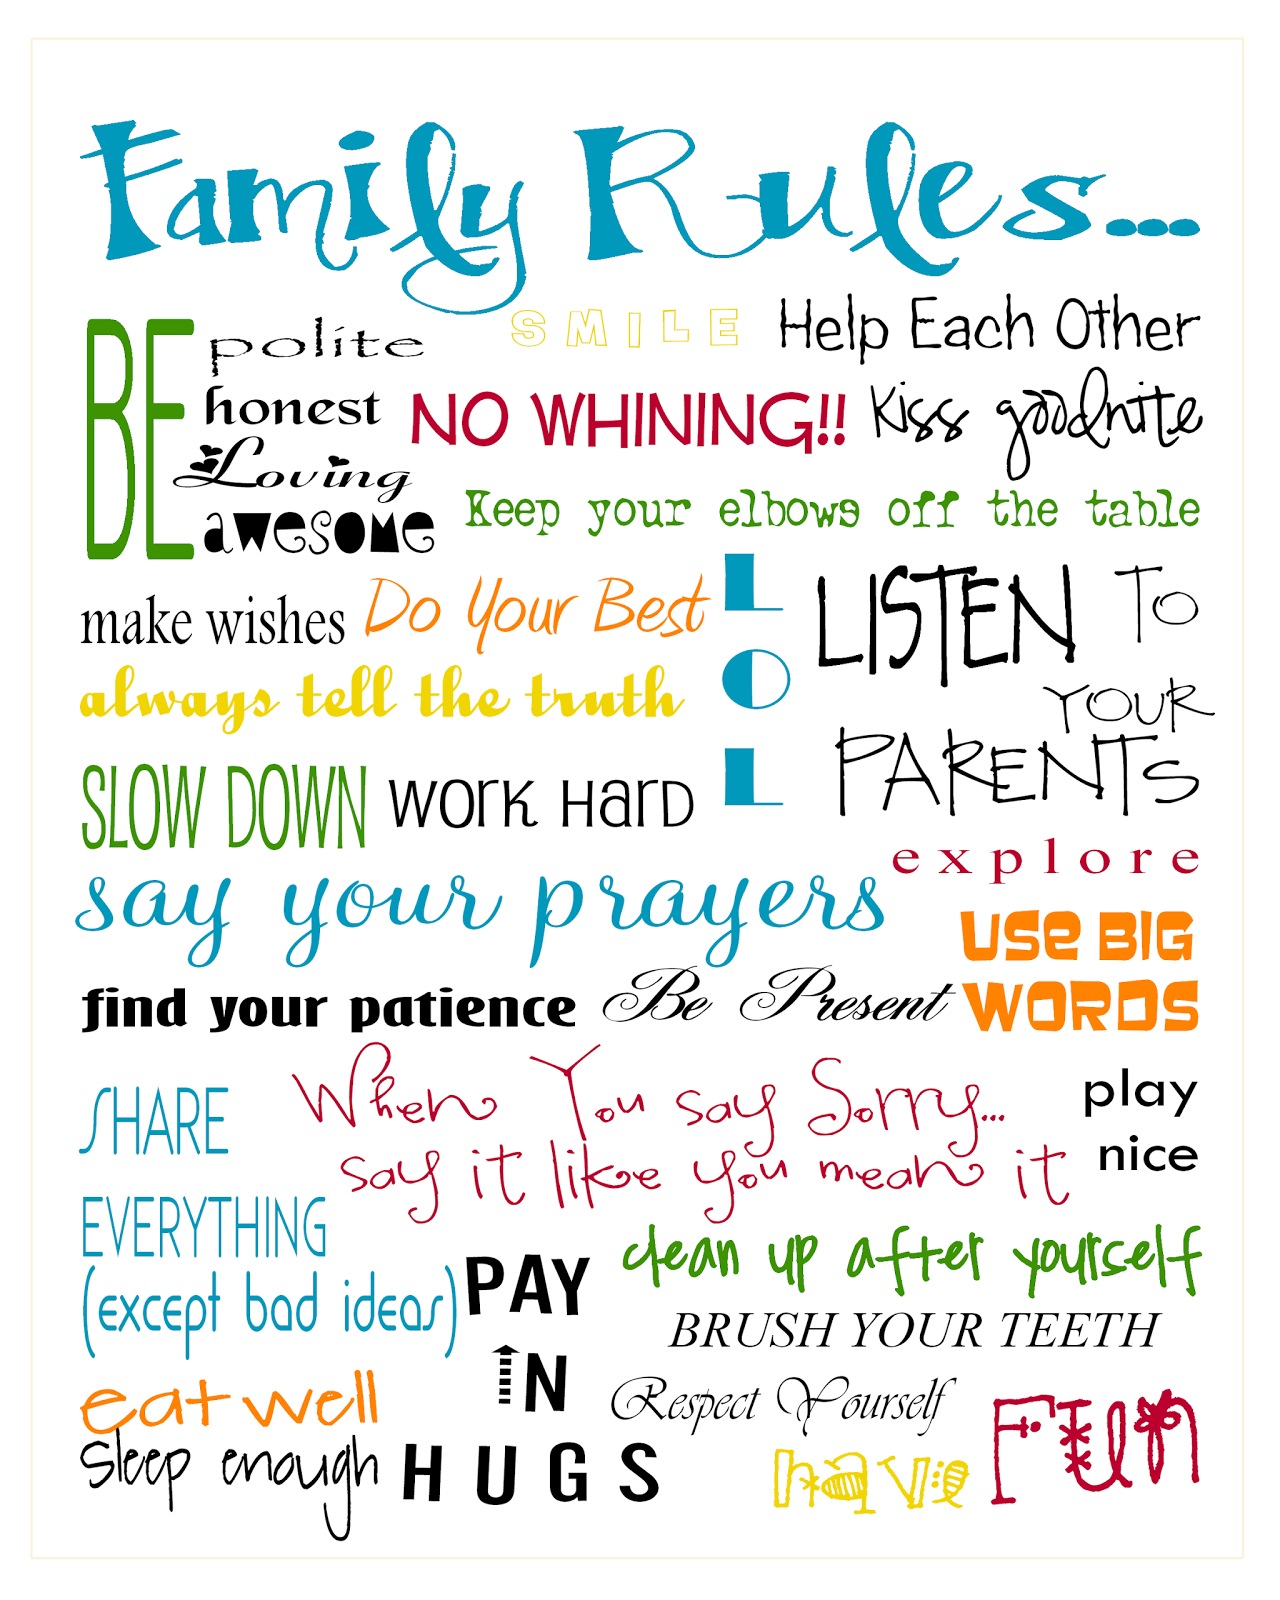 family rules clipart - photo #24